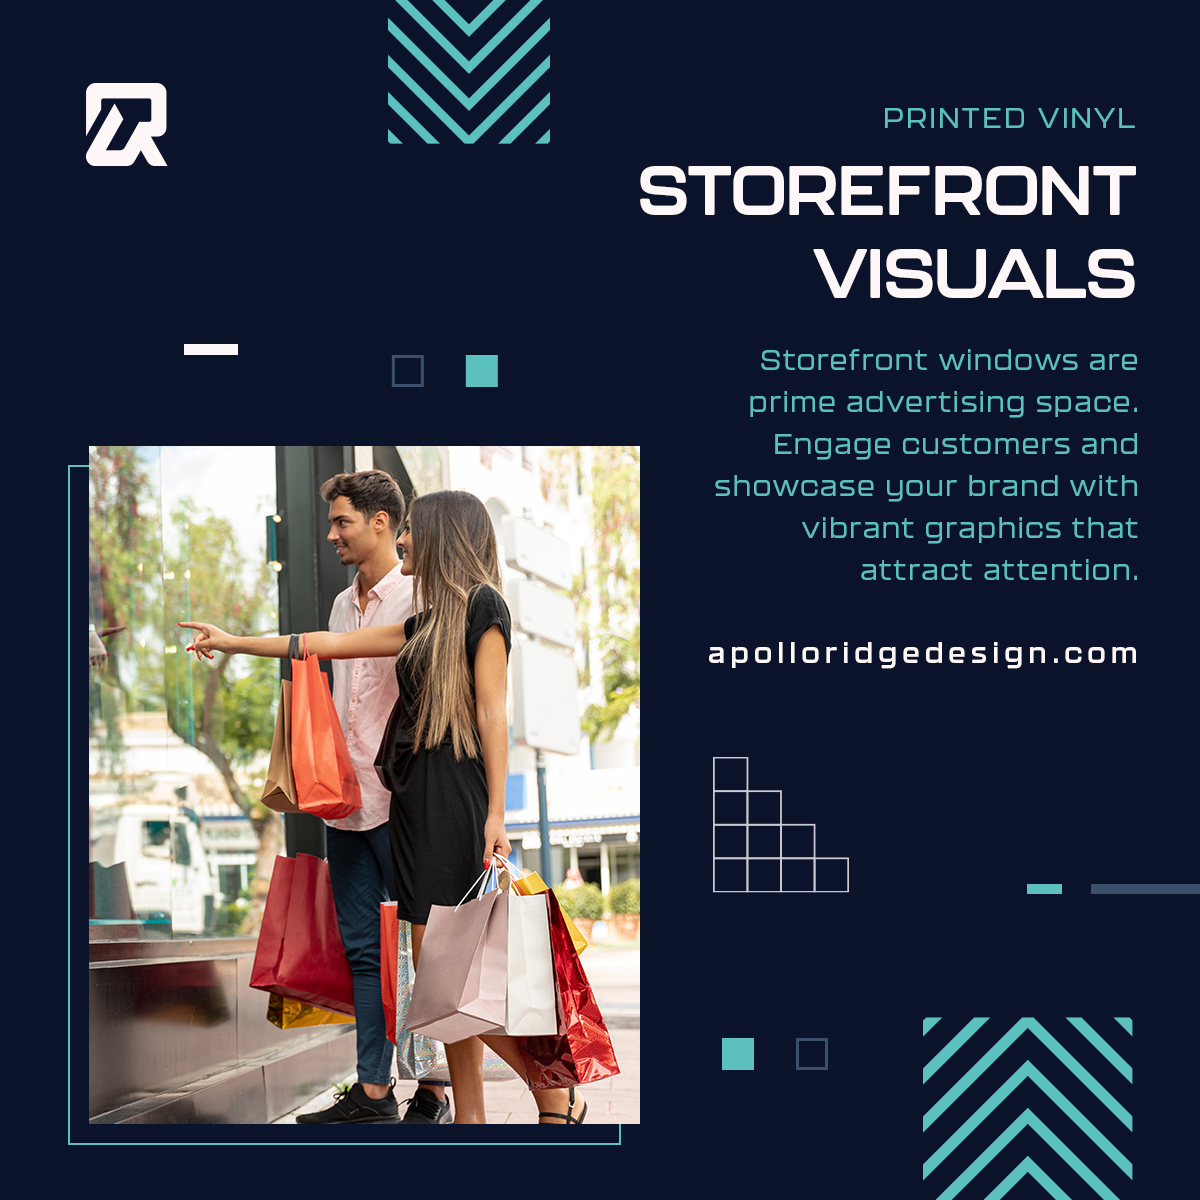 Create a visually stunning display that reflects your brand, showcases your products, and entices customers to step inside with simple or custom created vinyl graphics >>> 708.792.3232

#signage #vinyl #storefront #customers #branding #advertising #printmaterials #installation